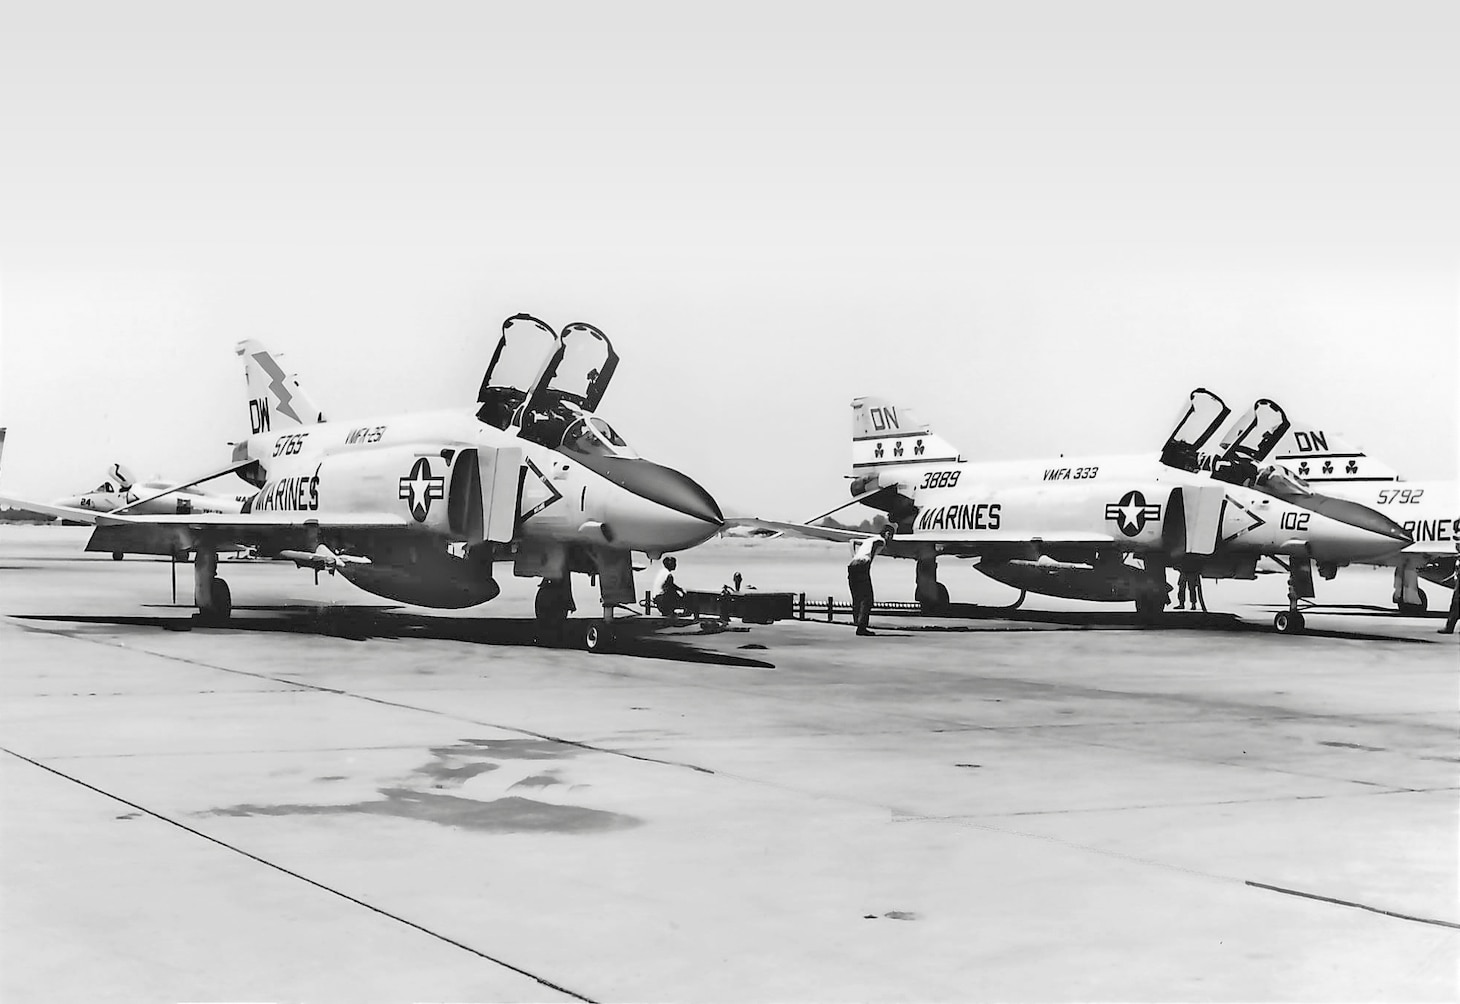 Two squadrons are represented here, perhaps on the VMFA-321 line, at Andrews Air Force Base, Maryland. Left to right, an F-4S of VMFA-251, then two F-4Js from VMFA-333. Note the “thunderbolt” and the three shamrocks, respectively.